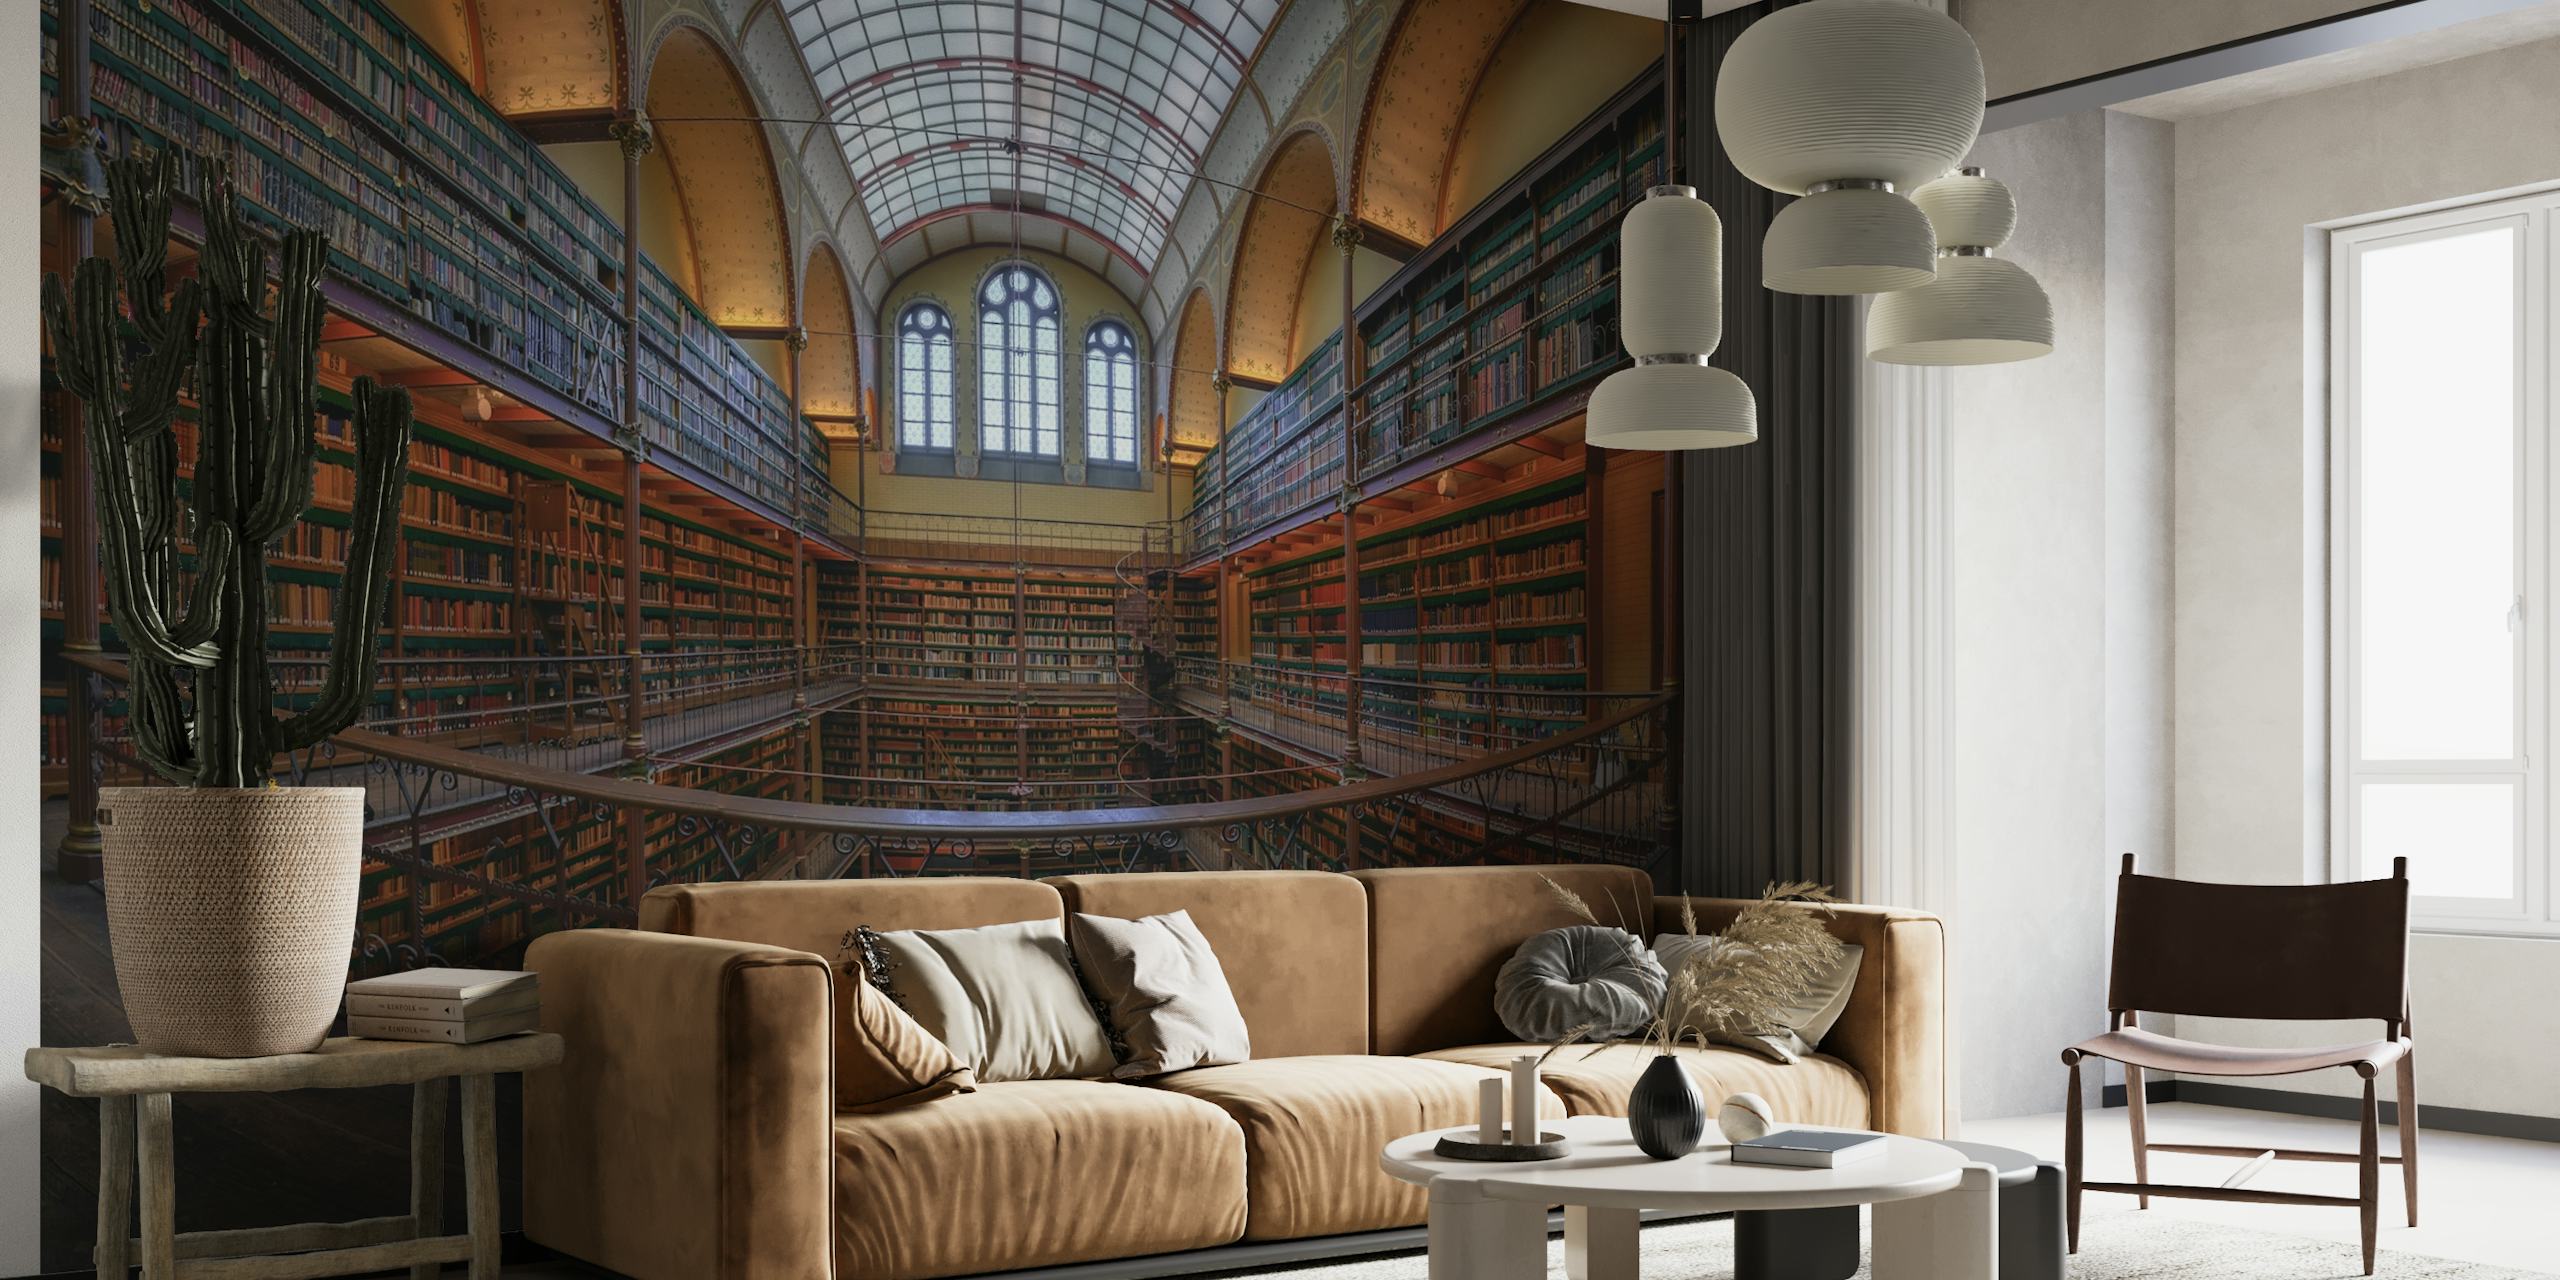 The Cuypers Library wallpaper